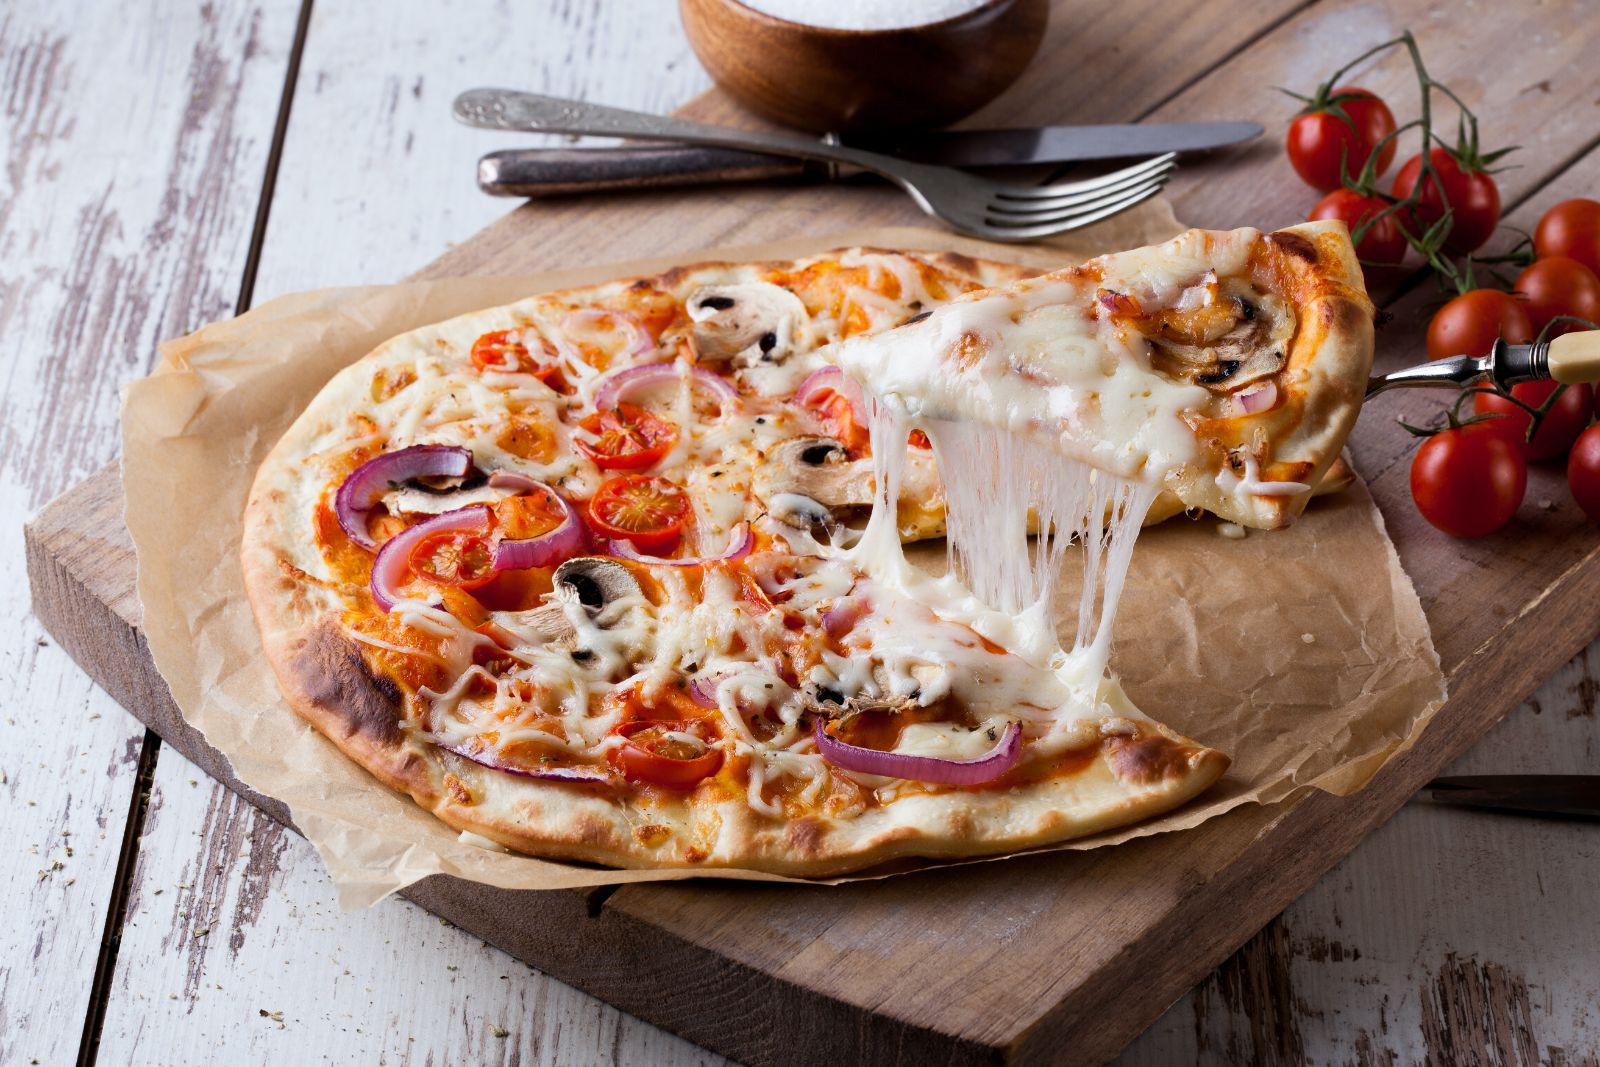 A cheesy slice of pizza being lifted from the whole pizza with mushrooms, onions, tomatoes and sauce on a thin crust